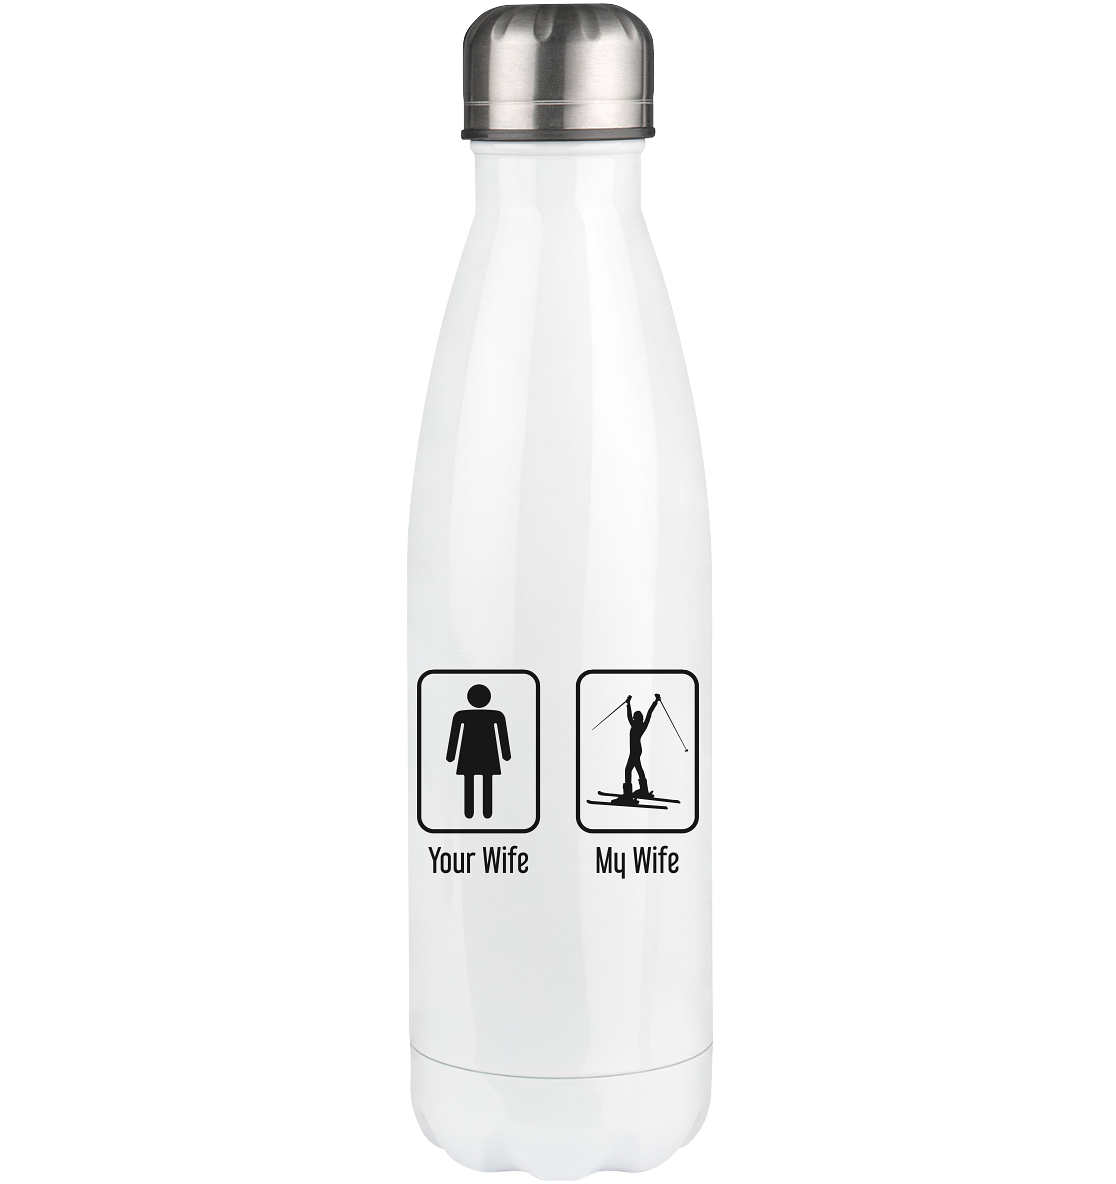 Your Wife - My Wife - Edelstahl Thermosflasche klettern ski 500ml